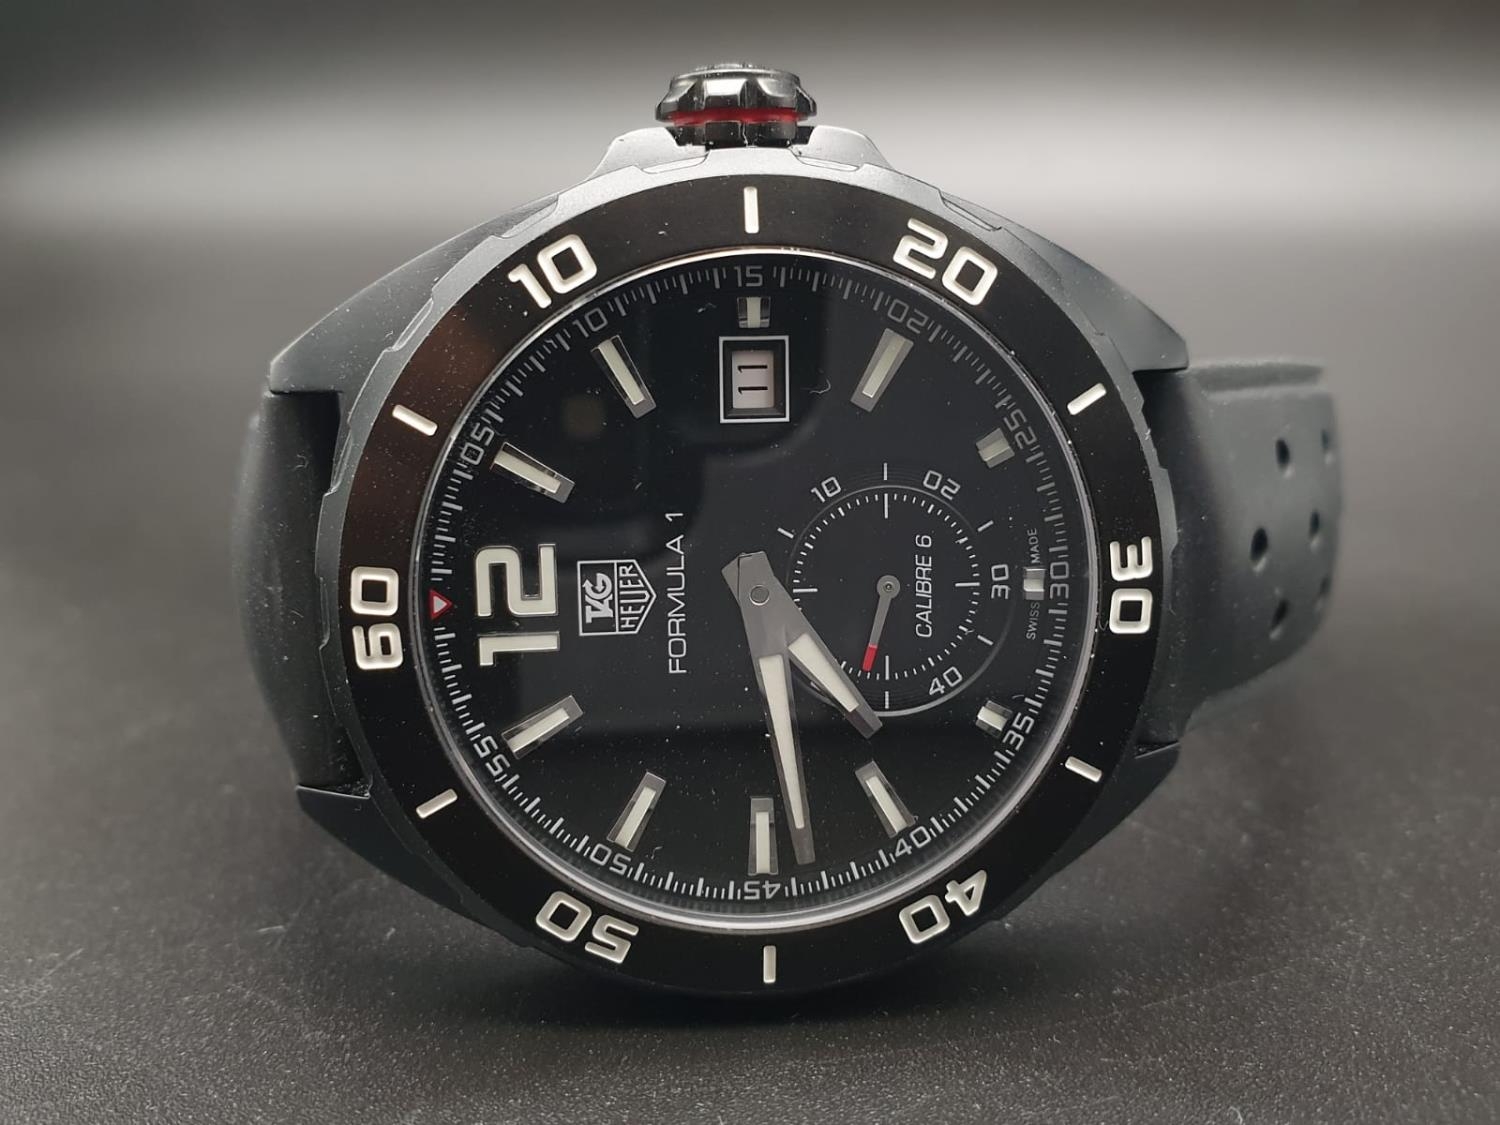 Tag Heuer Formula 1 watch black face and strap, 42mm - Image 4 of 10